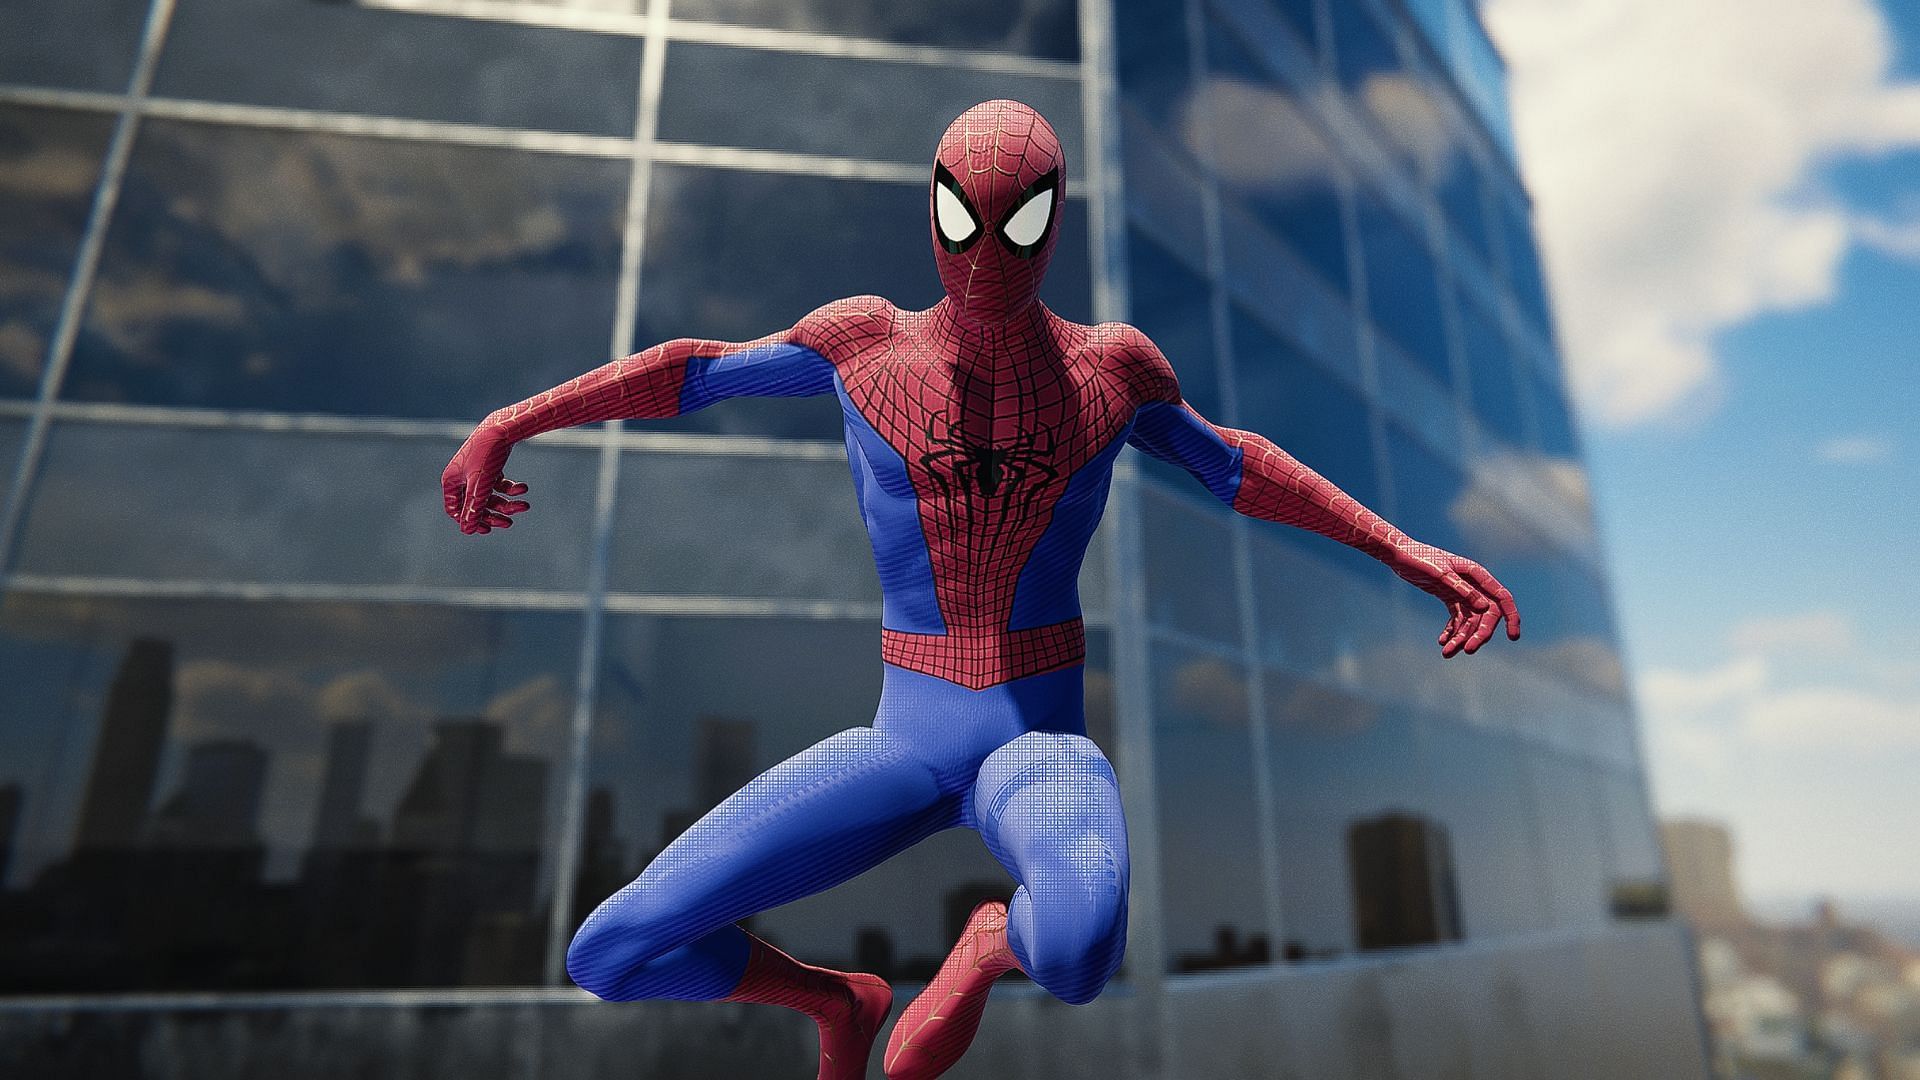 Crawling at Marvel's Spider-Man Remastered Nexus - Mods and community